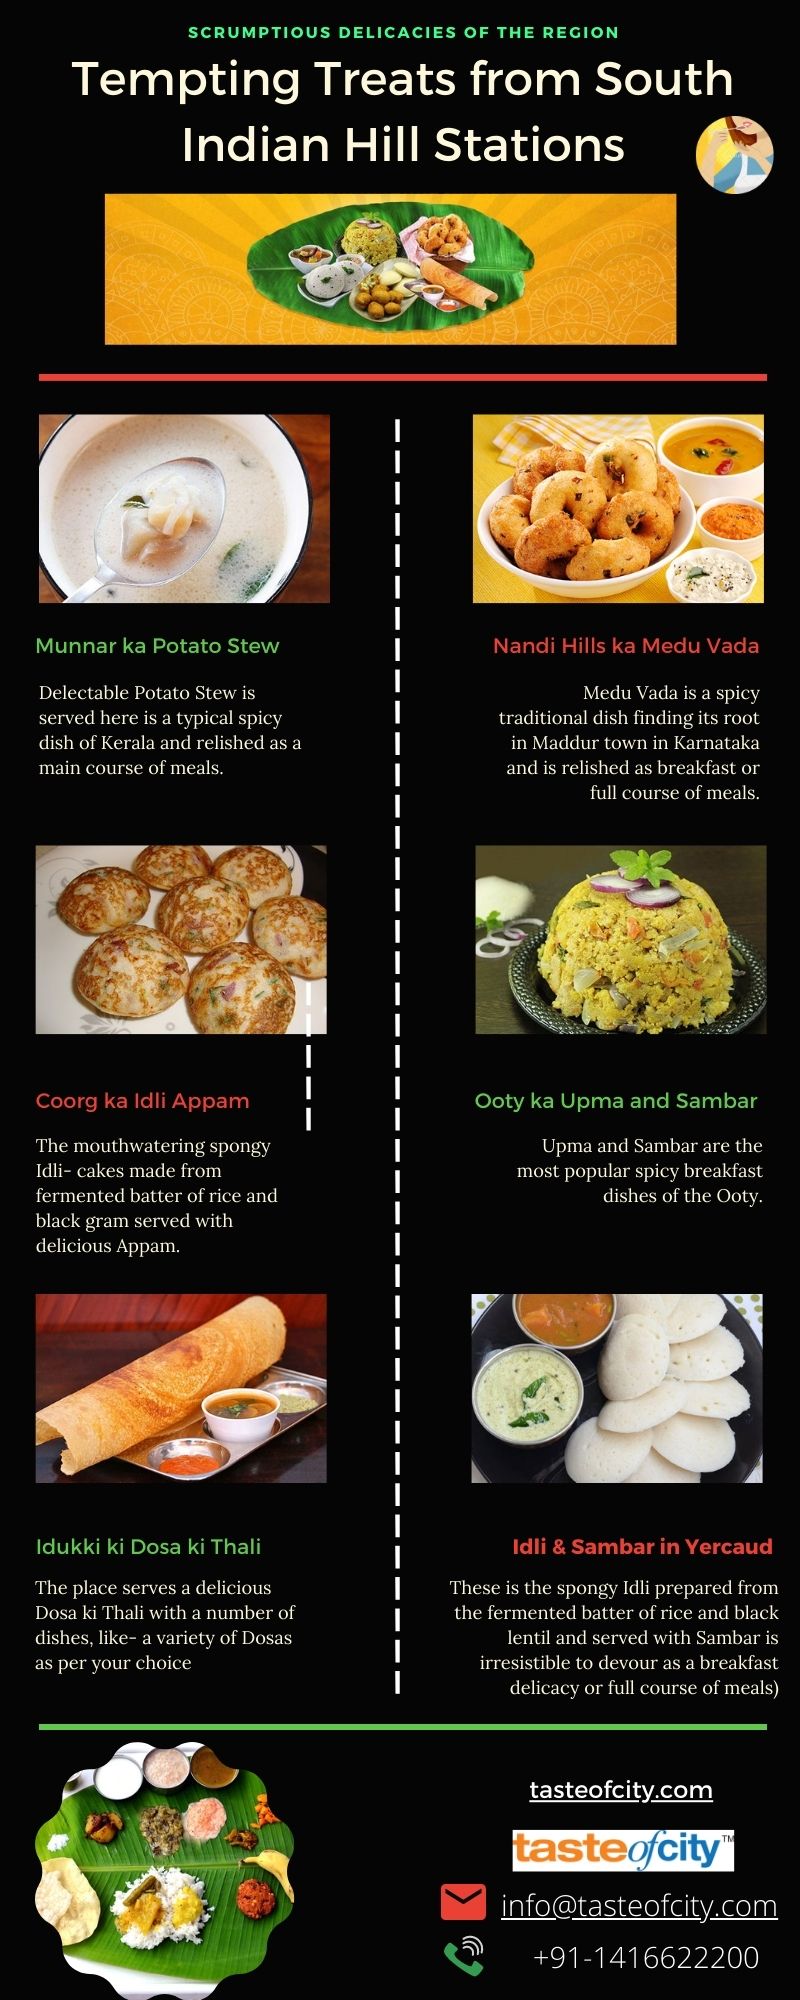 Tempting Treats from South Indian Hill Stations.jpg This Infographic based on Tempting Treats from South Indian Hill Stations of India, that can be easily prepared at home and are also abundantly available at the nearby street vendors or eateries. If you wish to know more about such delicacies and locate y by tasteofcity